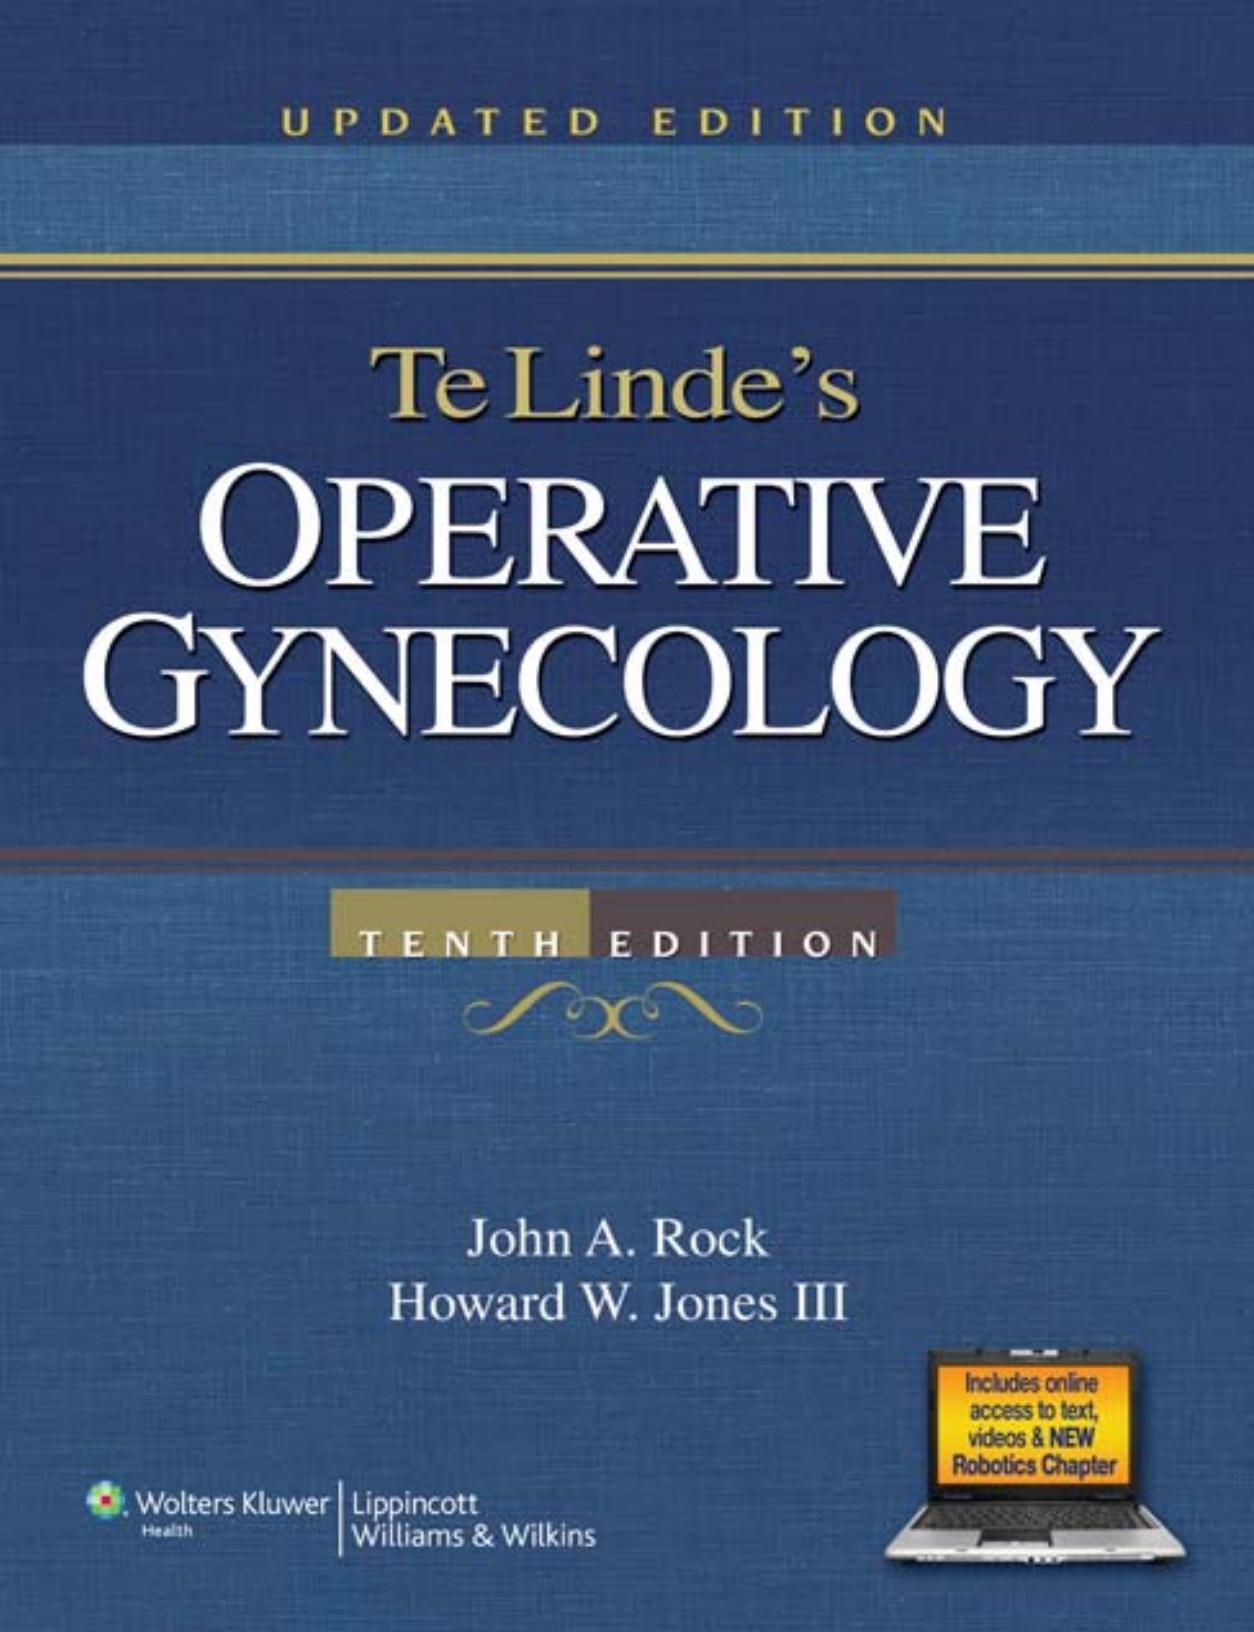 TE LINDE’S OPERATIVE GYNECOLOGY, TENTH EDITION